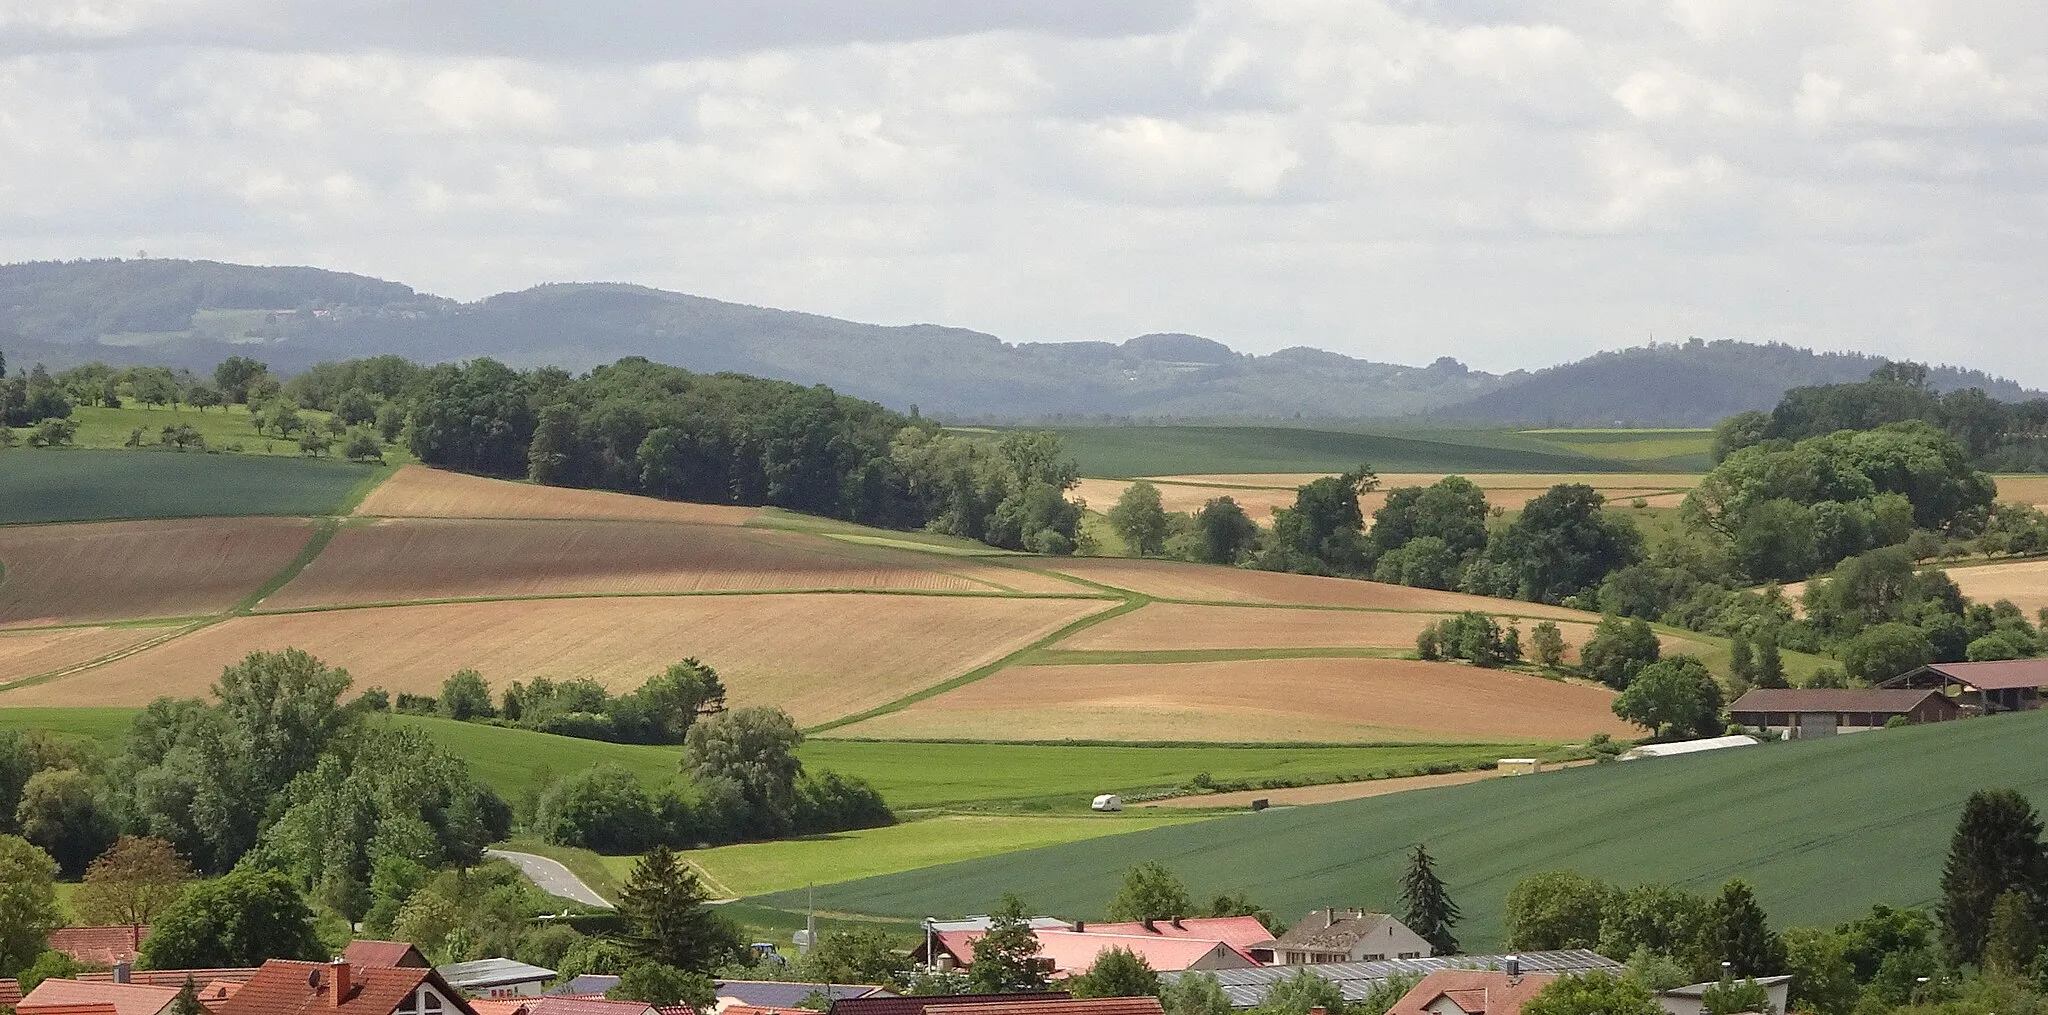 Photo showing: Natural monument "Hohl Kuhtränke" (Otzberg, Landkreis Darmstadt-Dieburg, Hesse, Germany). View from the lower slope of the Otzberg over the roofs of Nieder-Klingen to the wooded loess valley. In the background mountains of Vorderer Odenwald: on the left Neunkircher Höhe, on the right Altscheuer.